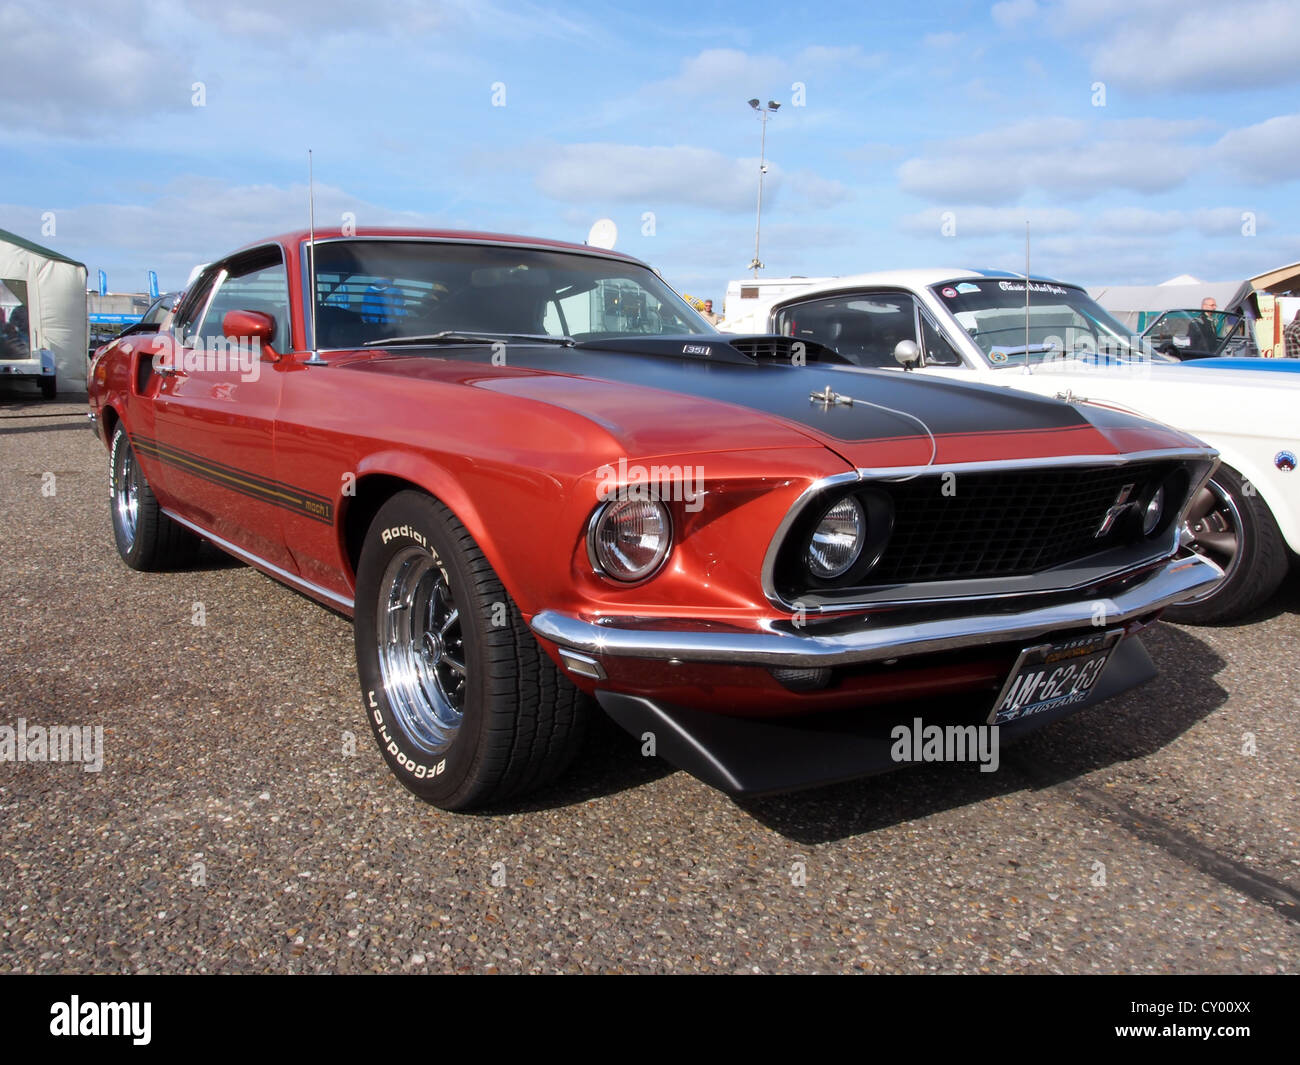 1969 Ford Mustang Mach 1 Stock Photo - Alamy